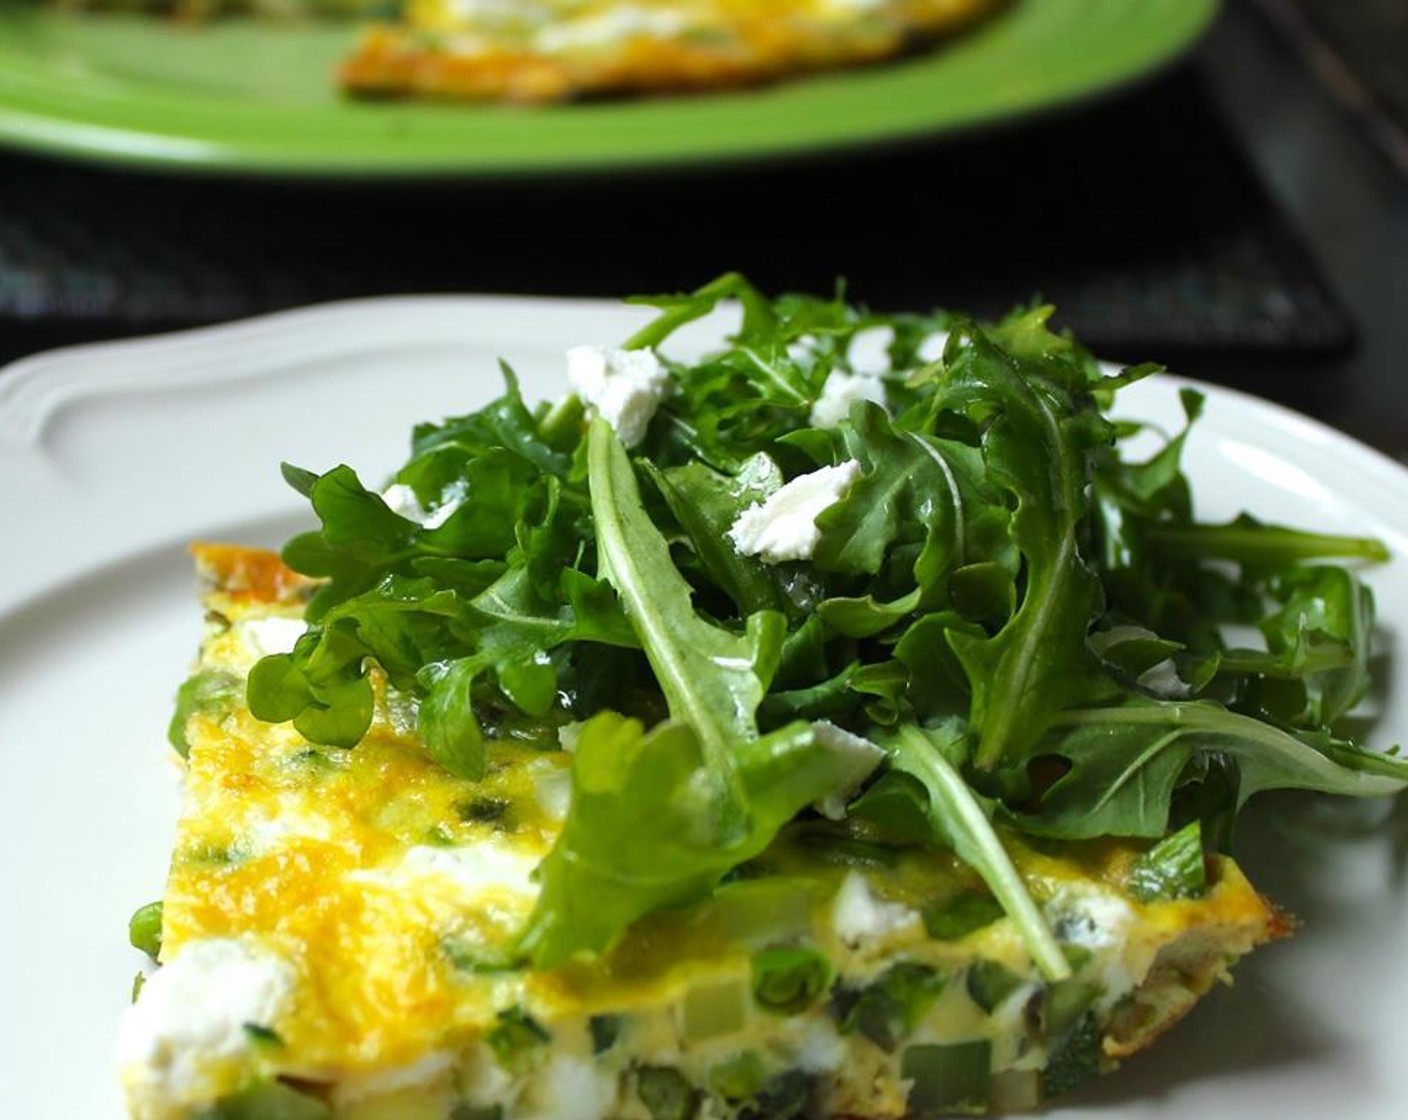 step 9 Carefully transfer the frittata to the broiler and cook for 2 minutes until it puffs slightly and the top is golden brown.  Remove the frittata from the broiler, and transfer it to a plate. Slice and serve immediately, topped with Arugula (to taste).